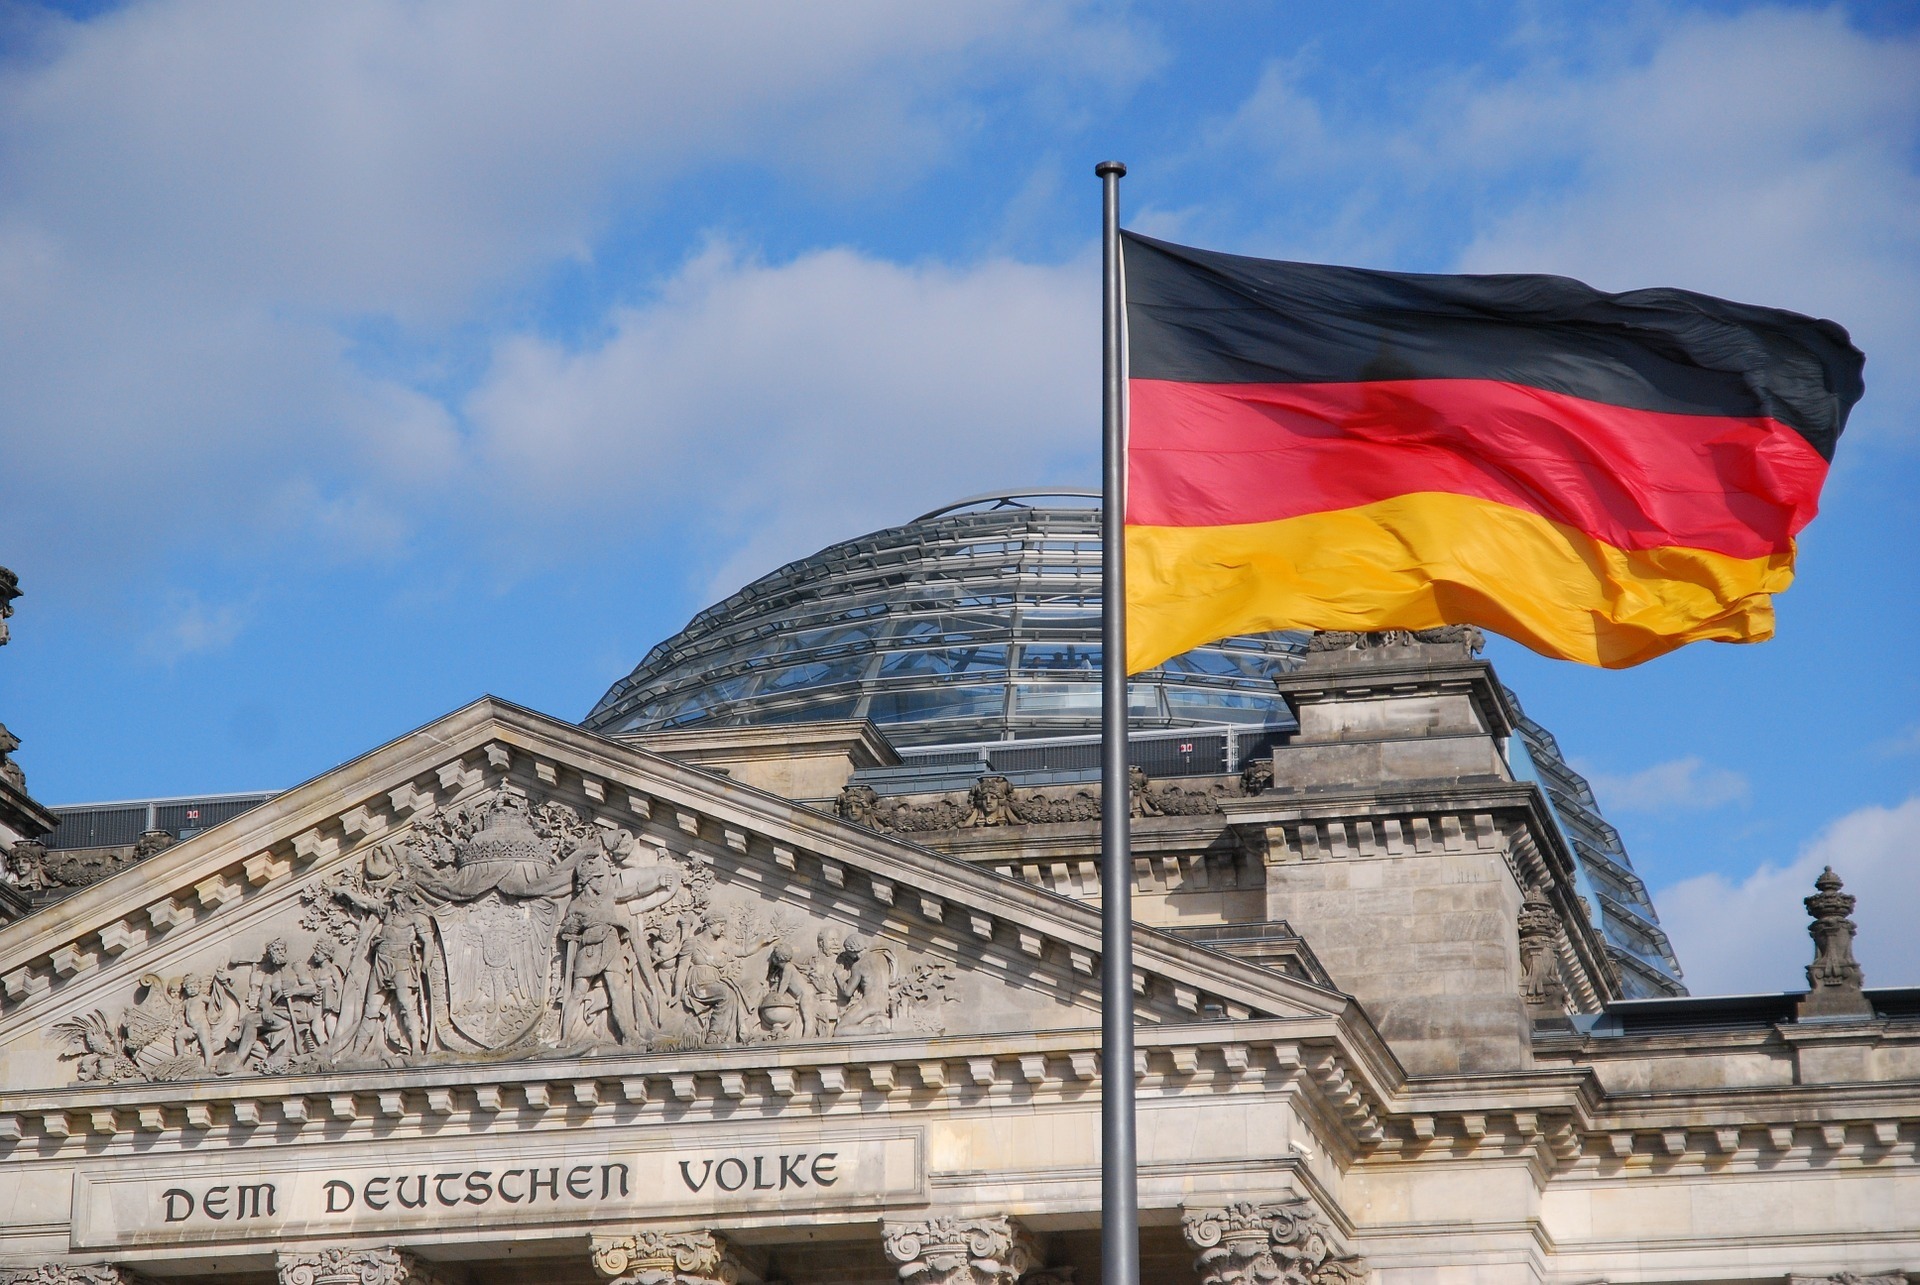 The bill will now be submitted to the German Bundesrat by the end of year 2...